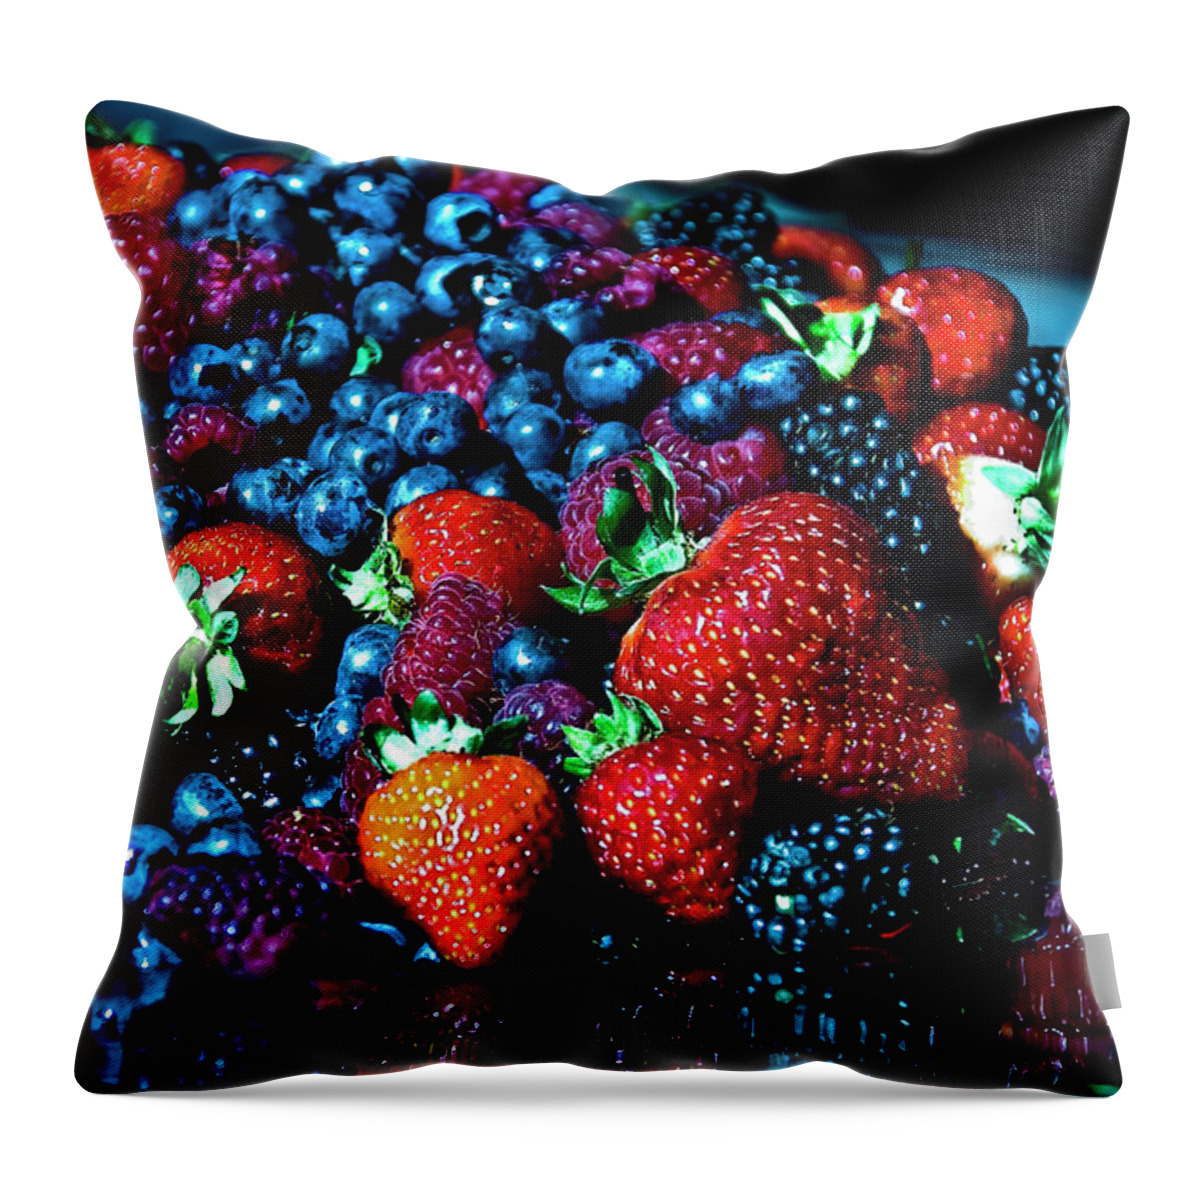 Serving Dish Throw Pillow featuring the photograph Berrylicious by Daniela White Images